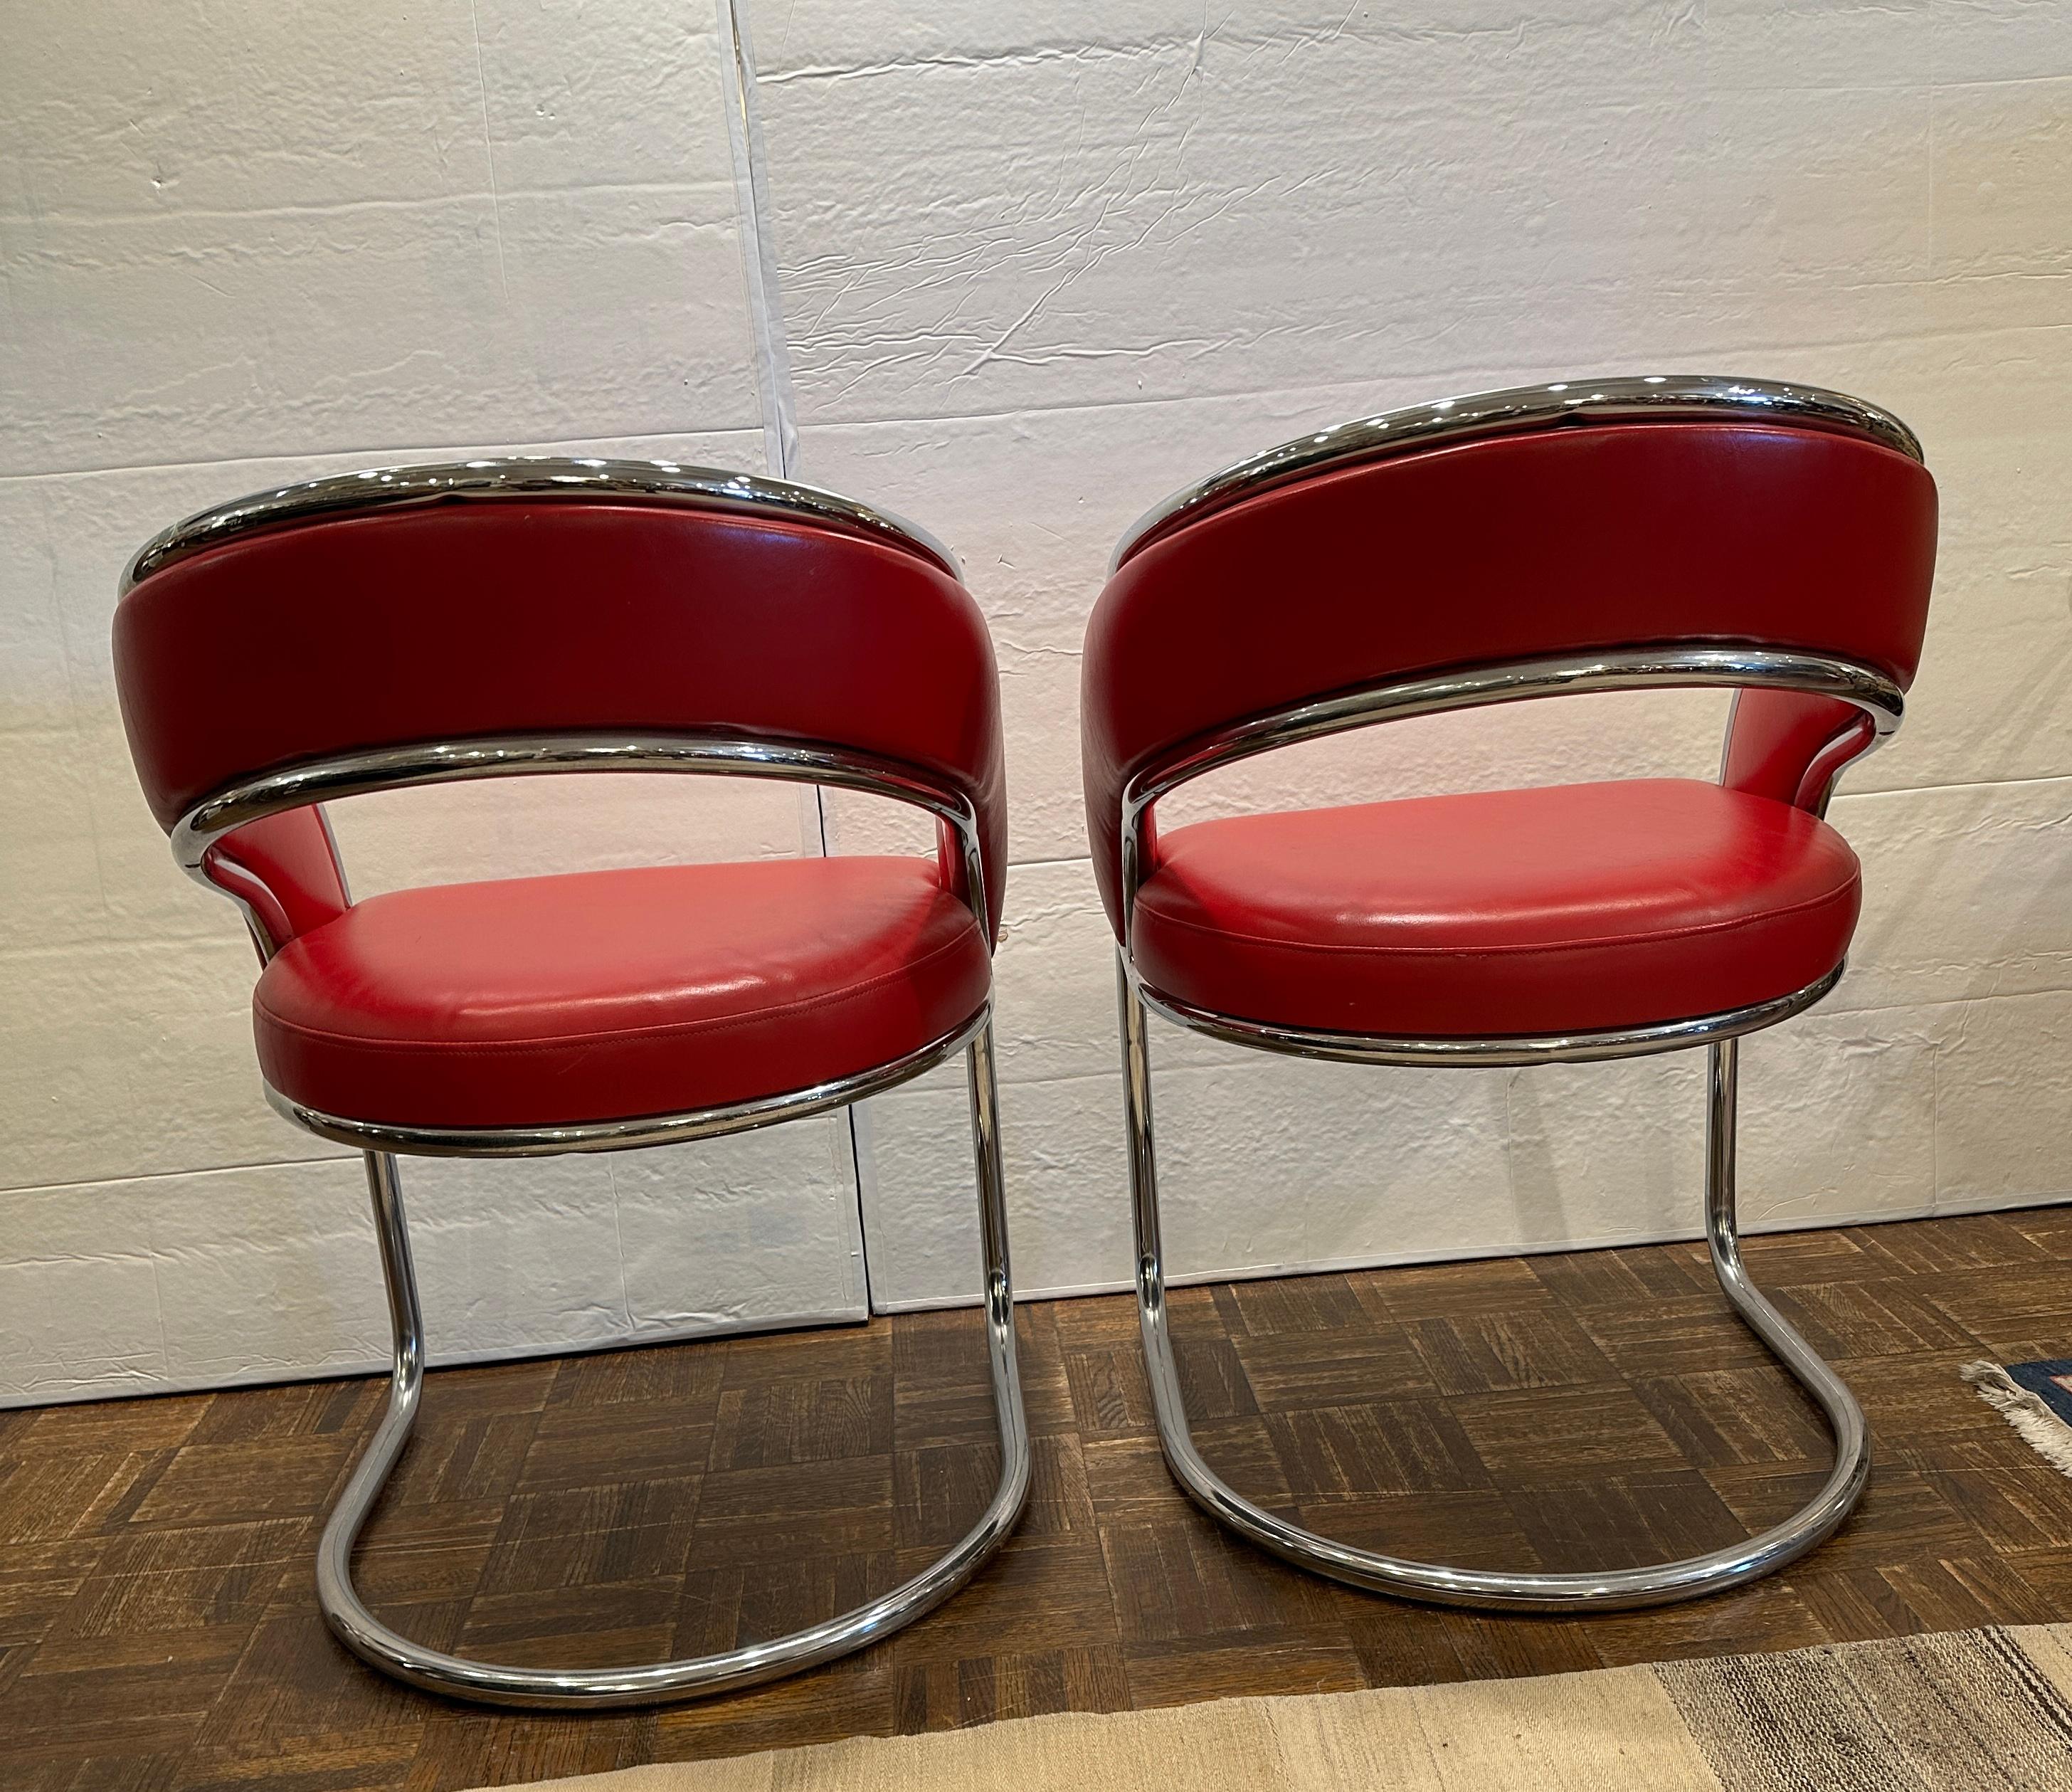 Mid century Modern red leather and Chrome chairs.  Sold as pair.
Bright true red leather nicely accented in bright chrome frame. Very well designed for comfort.  There are another pair listed on this site.
Excellent condition.